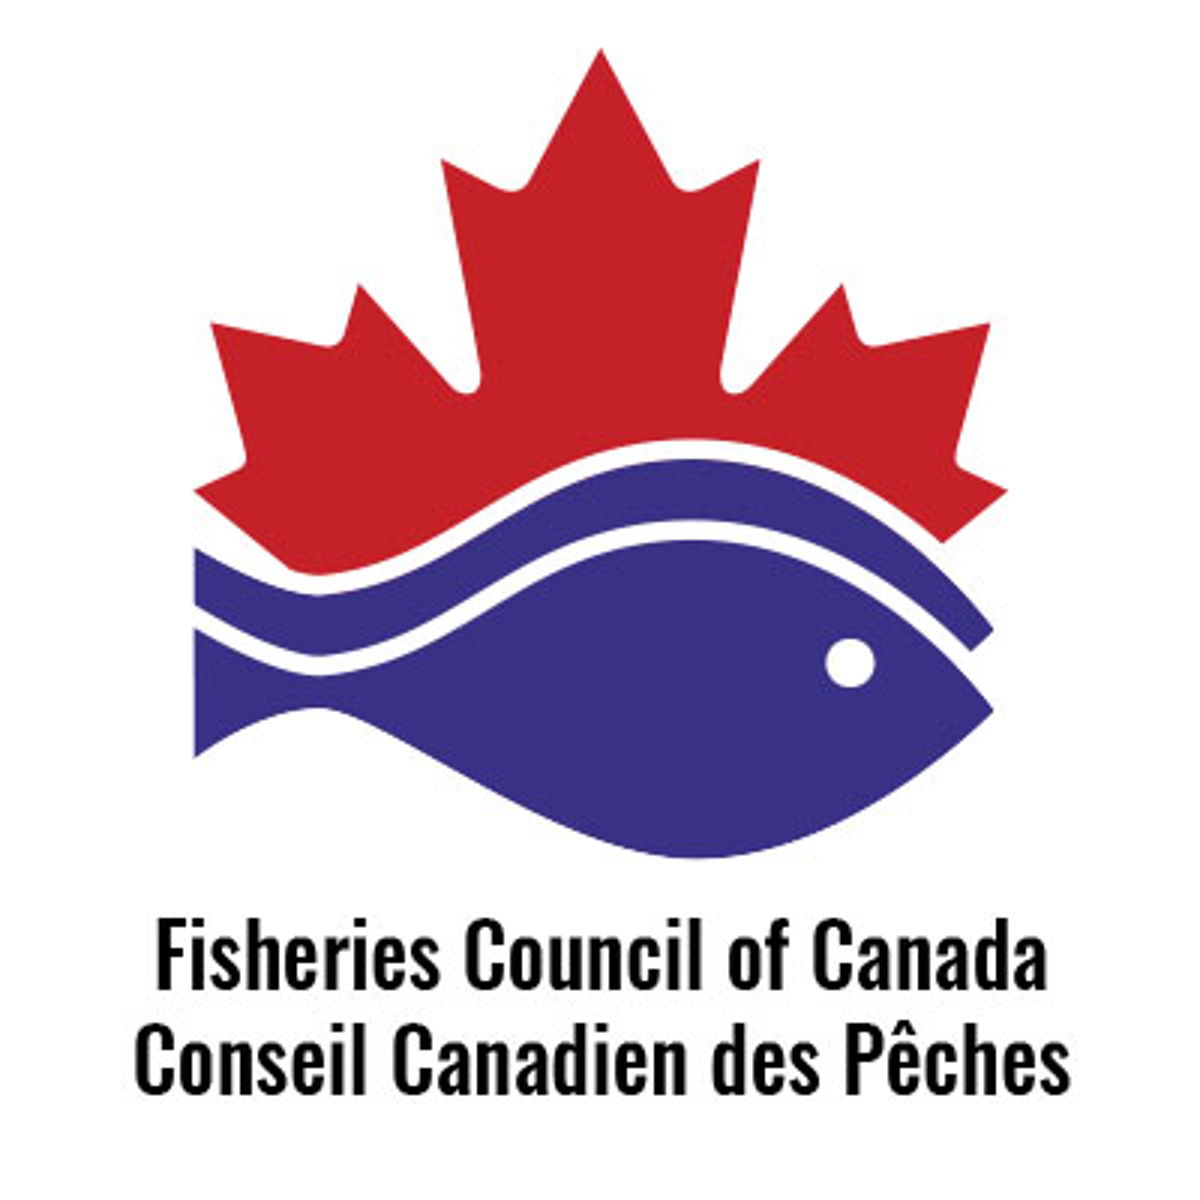 Fisheries Council of Canada Warns Minister Against Creating Instability in the Industry: OPINION